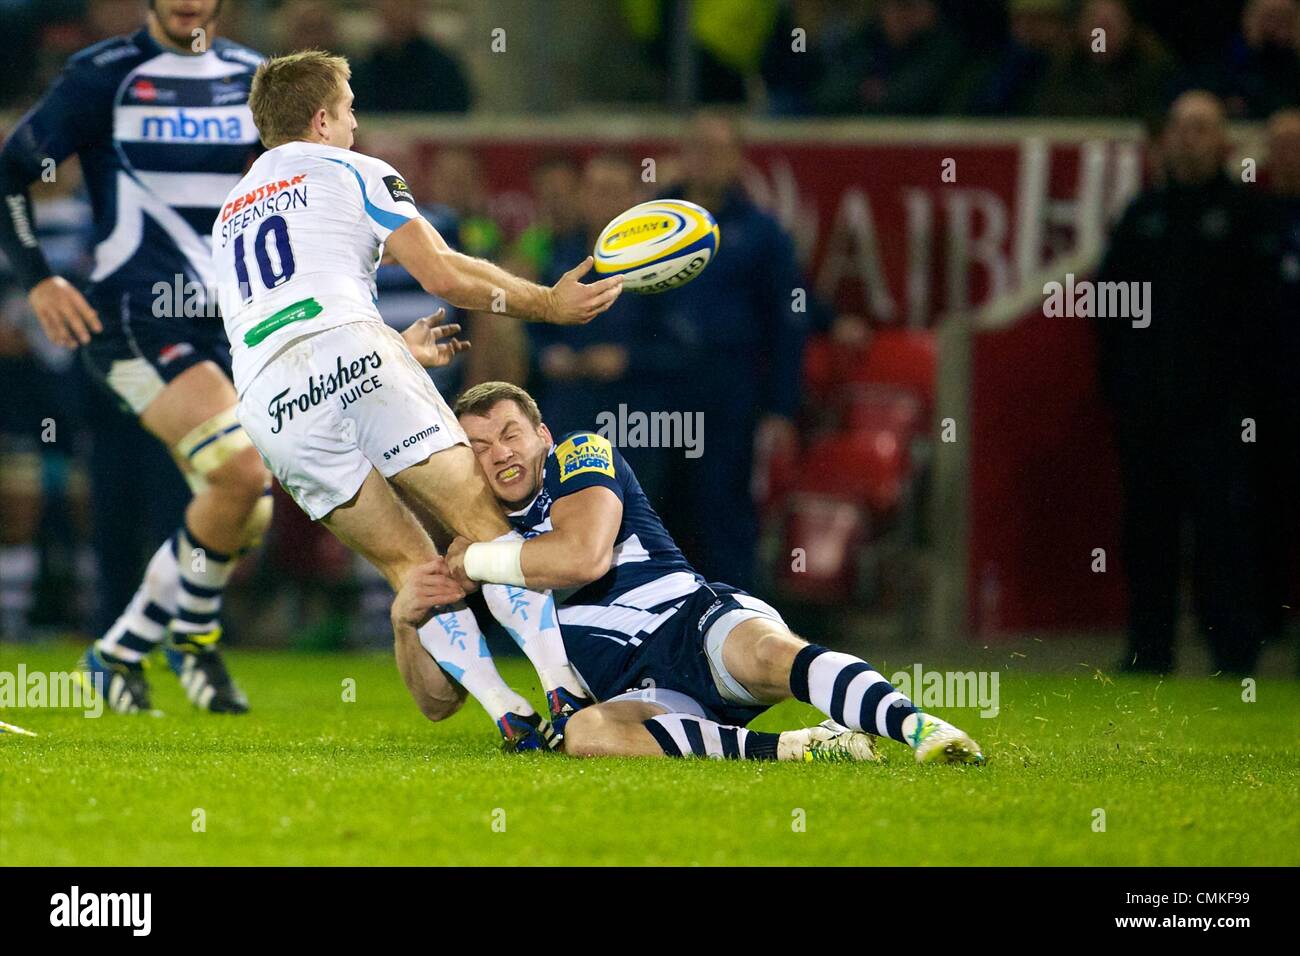 Salford, UK. 01st Nov, 2013. Exeter Chiefs Gareth Steenson (fly-half) and Sale Sharks Mark Cueto (wing) during the Aviva Premiership Rugby match between Sale Sharks v Exeter Chiefs from the AJ Bell Stadium. Credit:  Action Plus Sports/Alamy Live News Stock Photo